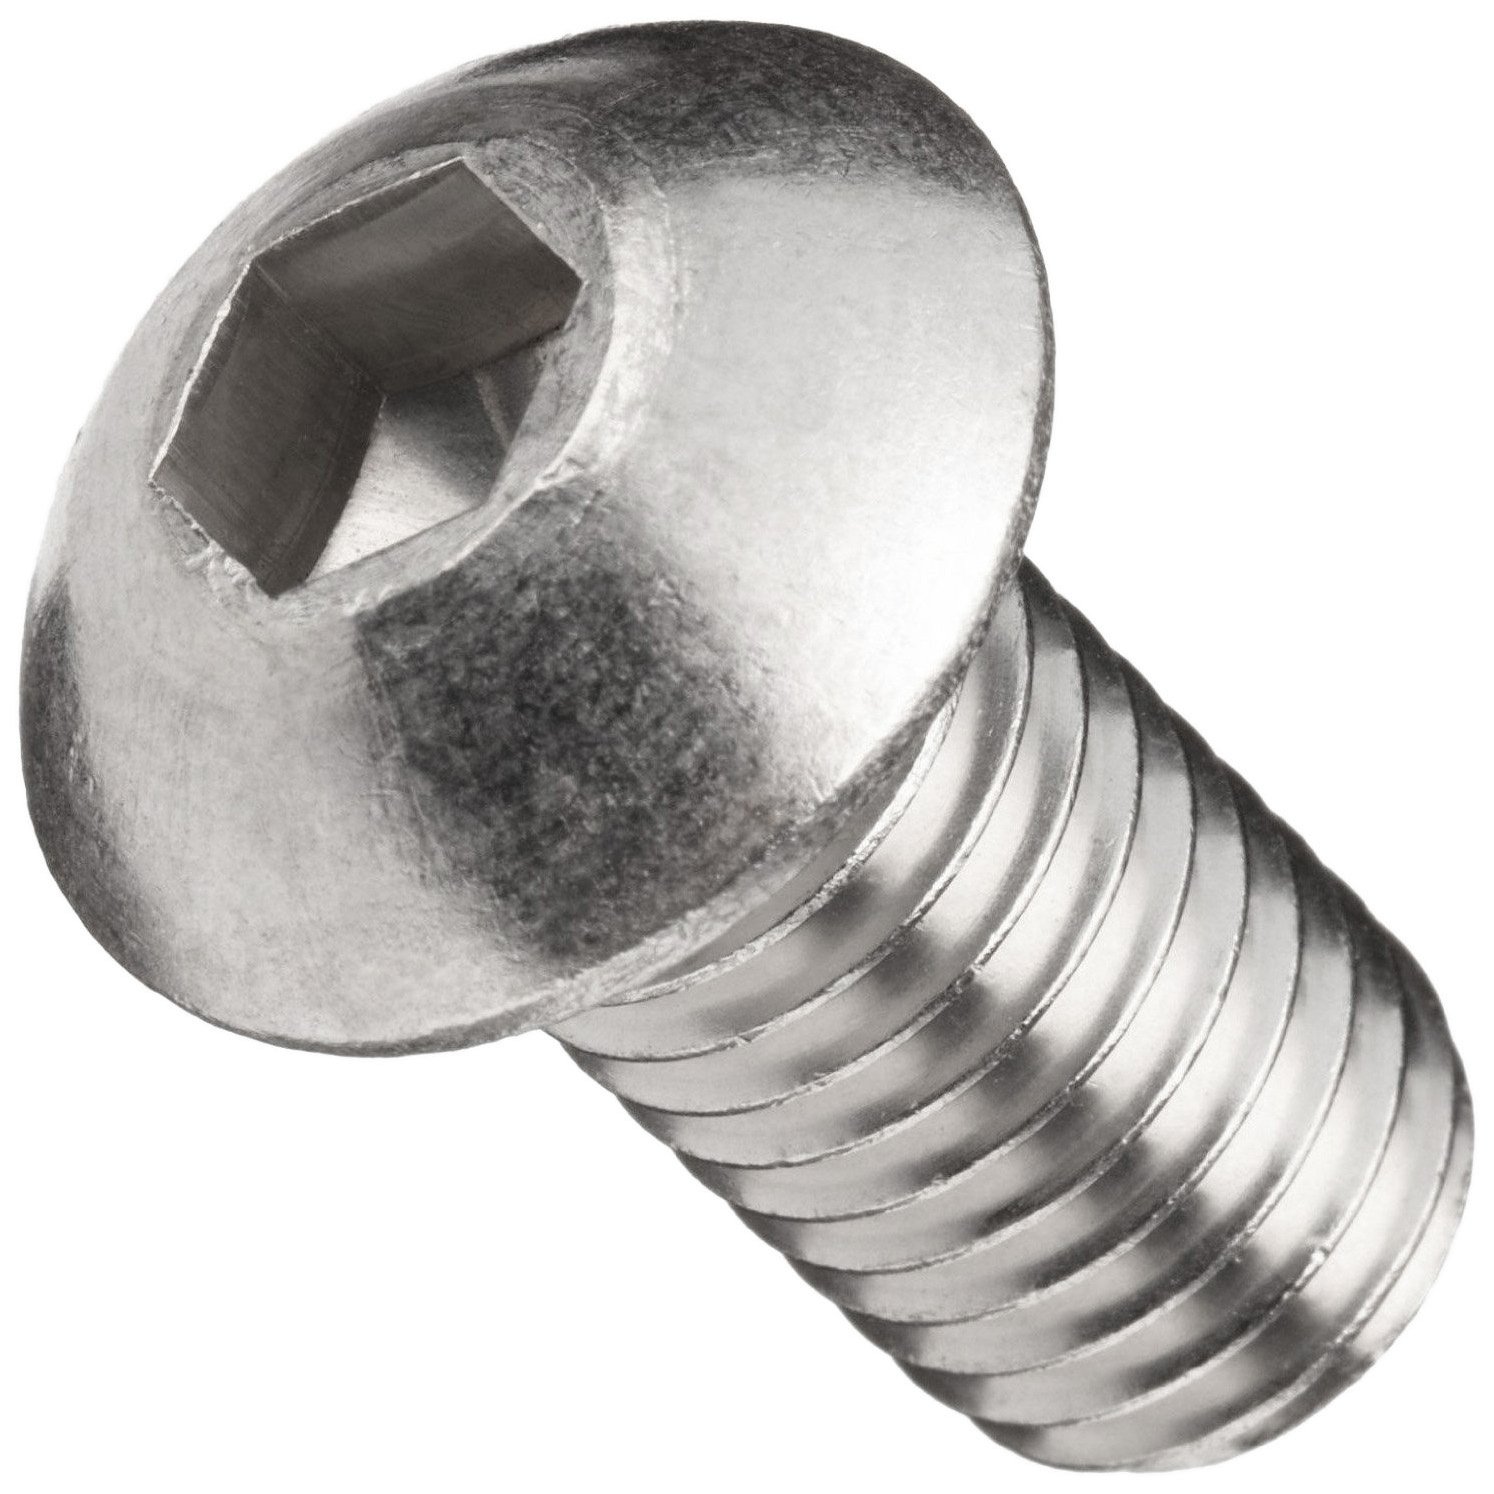 100 SHORT LENGTH 1-72 Hex-Drive Button-Head Screw-In Rivets For Restorations 